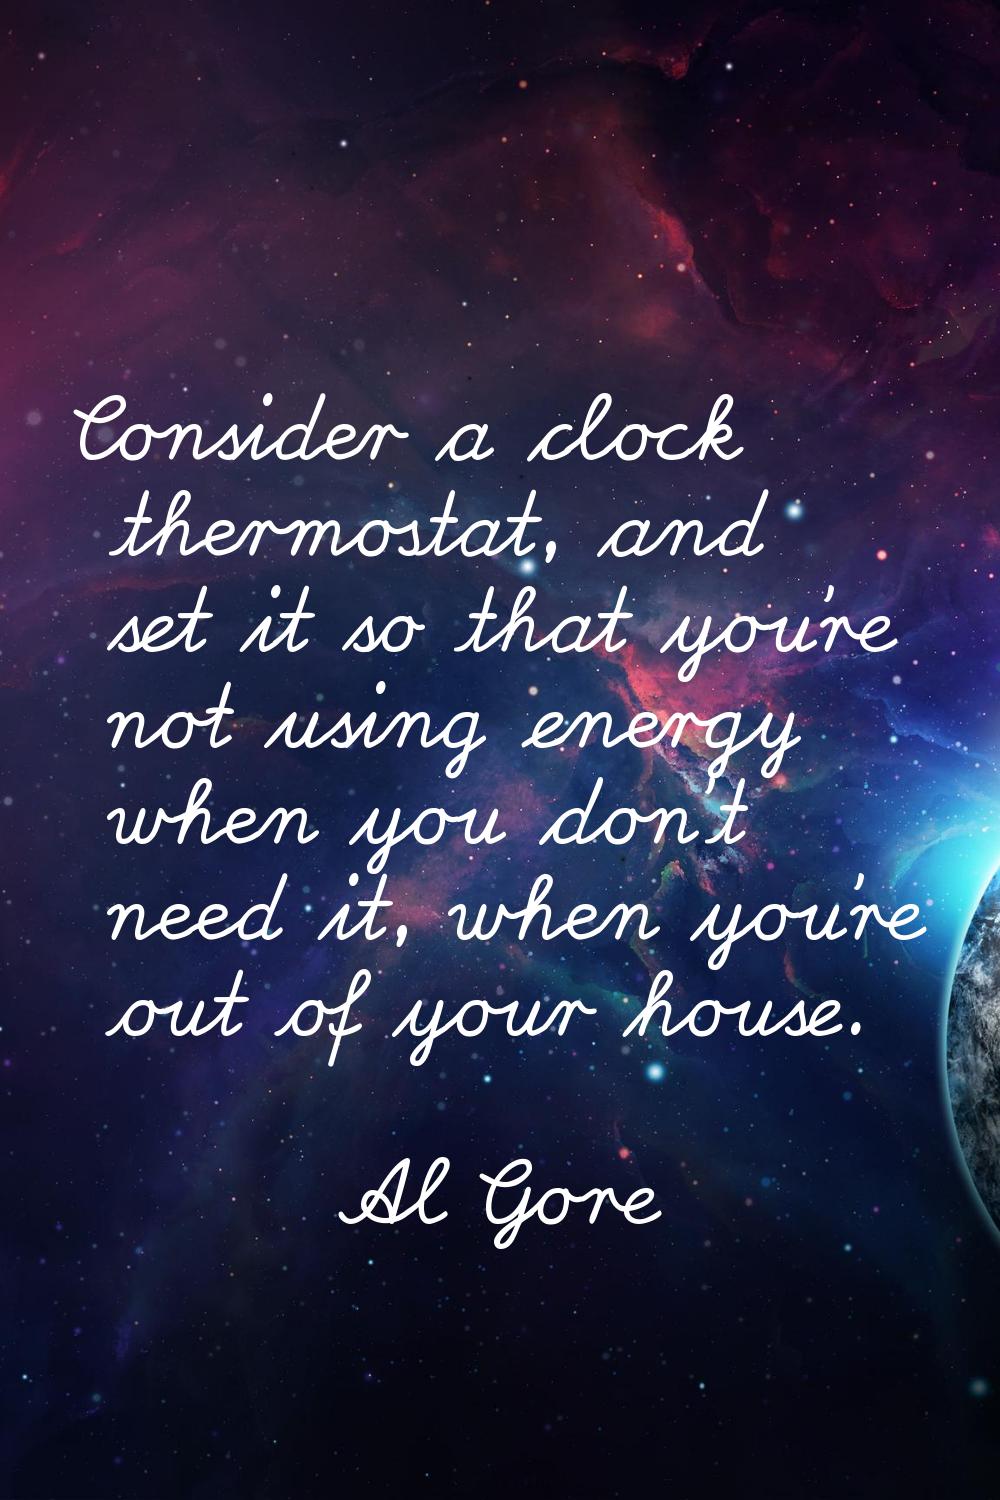 Consider a clock thermostat, and set it so that you're not using energy when you don't need it, whe